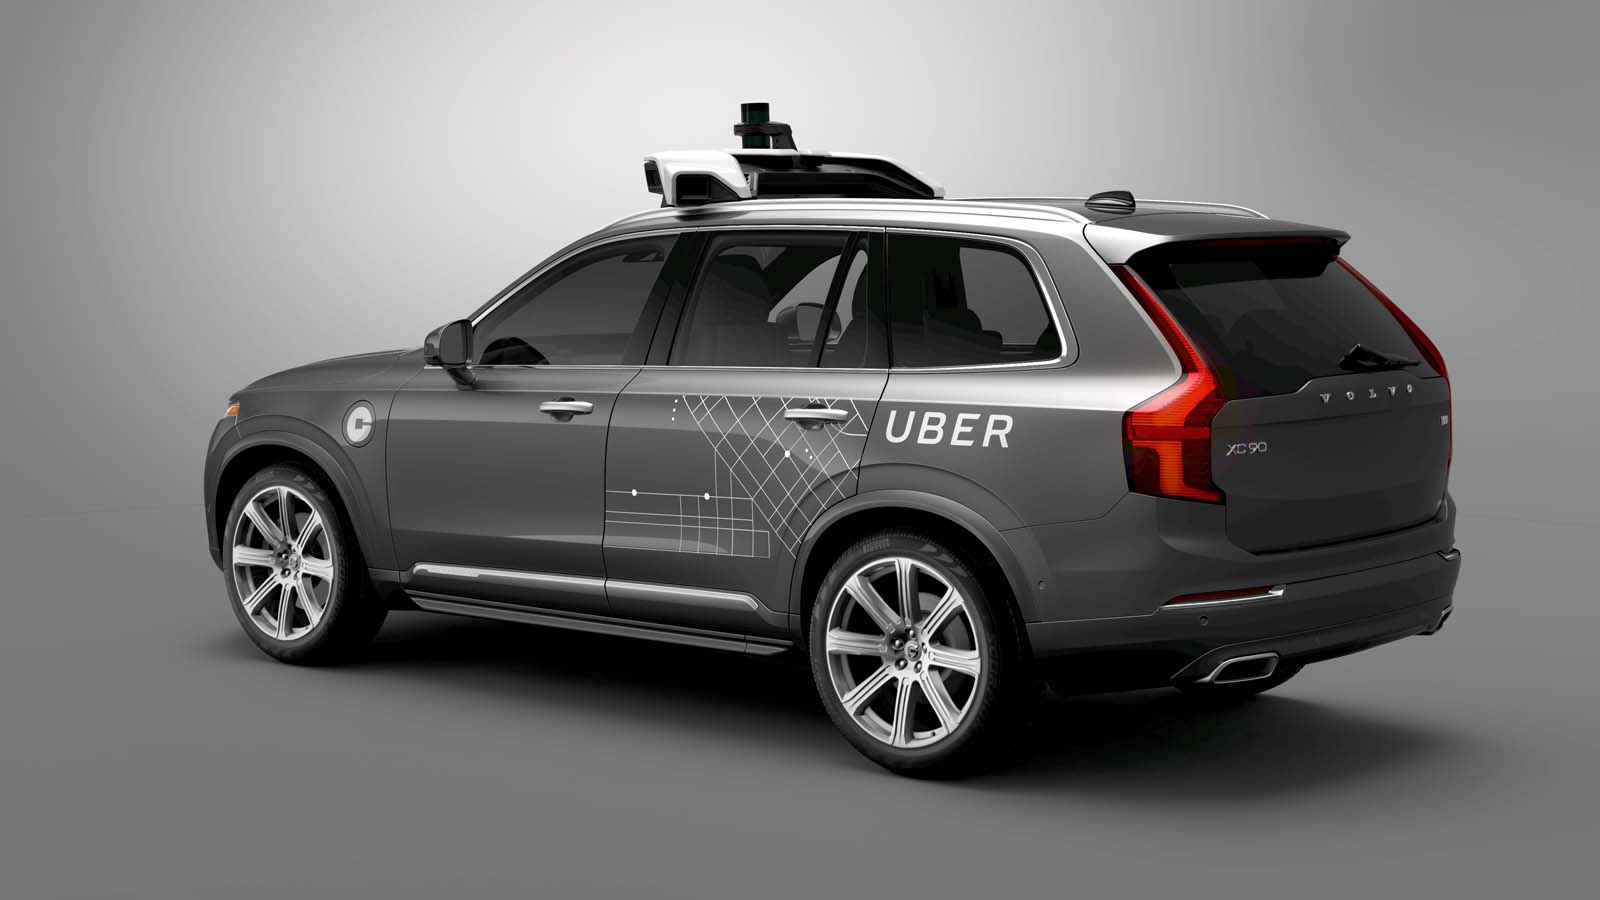 194844_volvo_cars_and_uber_join_forces_to_develop_autonomous_driving_cars taciki.ru